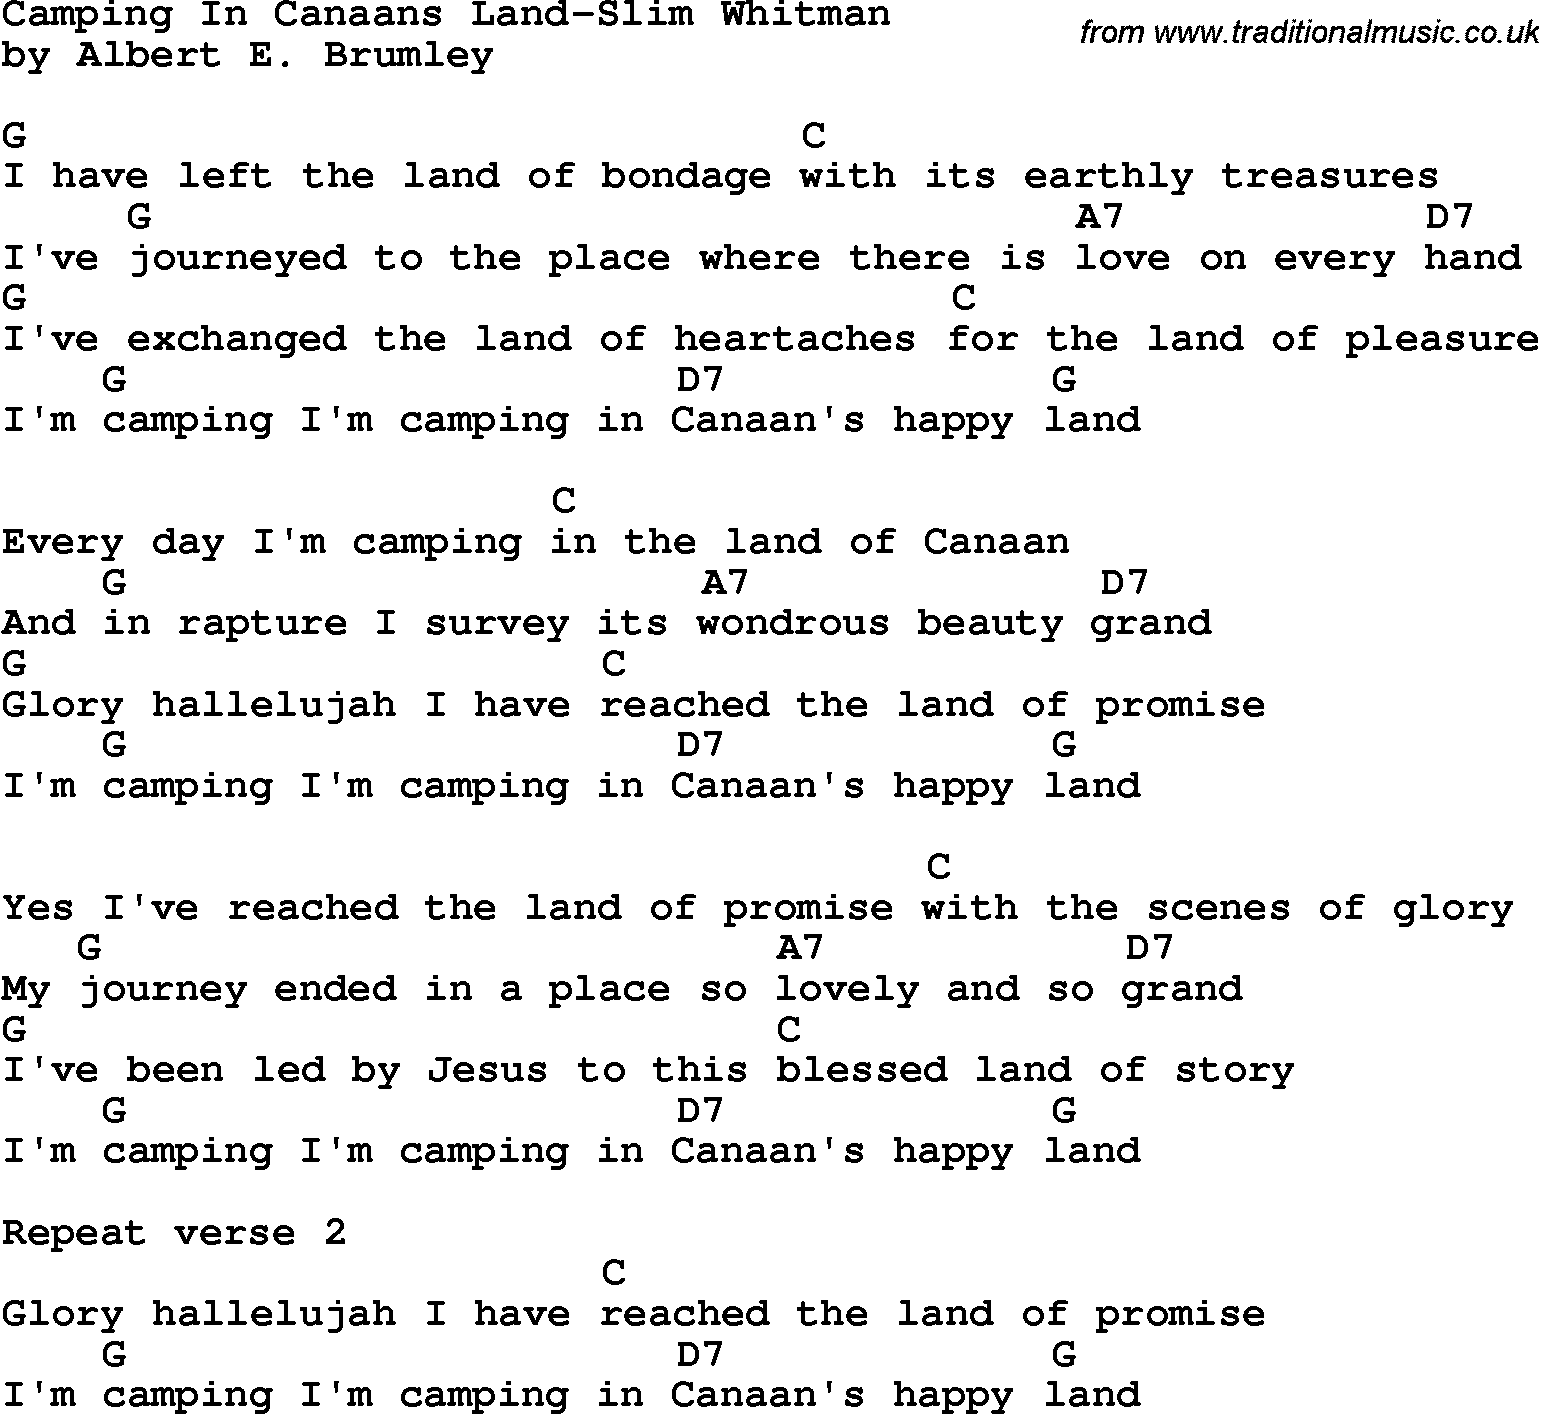 Country, Southern and Bluegrass Gospel Song Camping In Canaan’s Land-Slim Whitman lyrics and chords